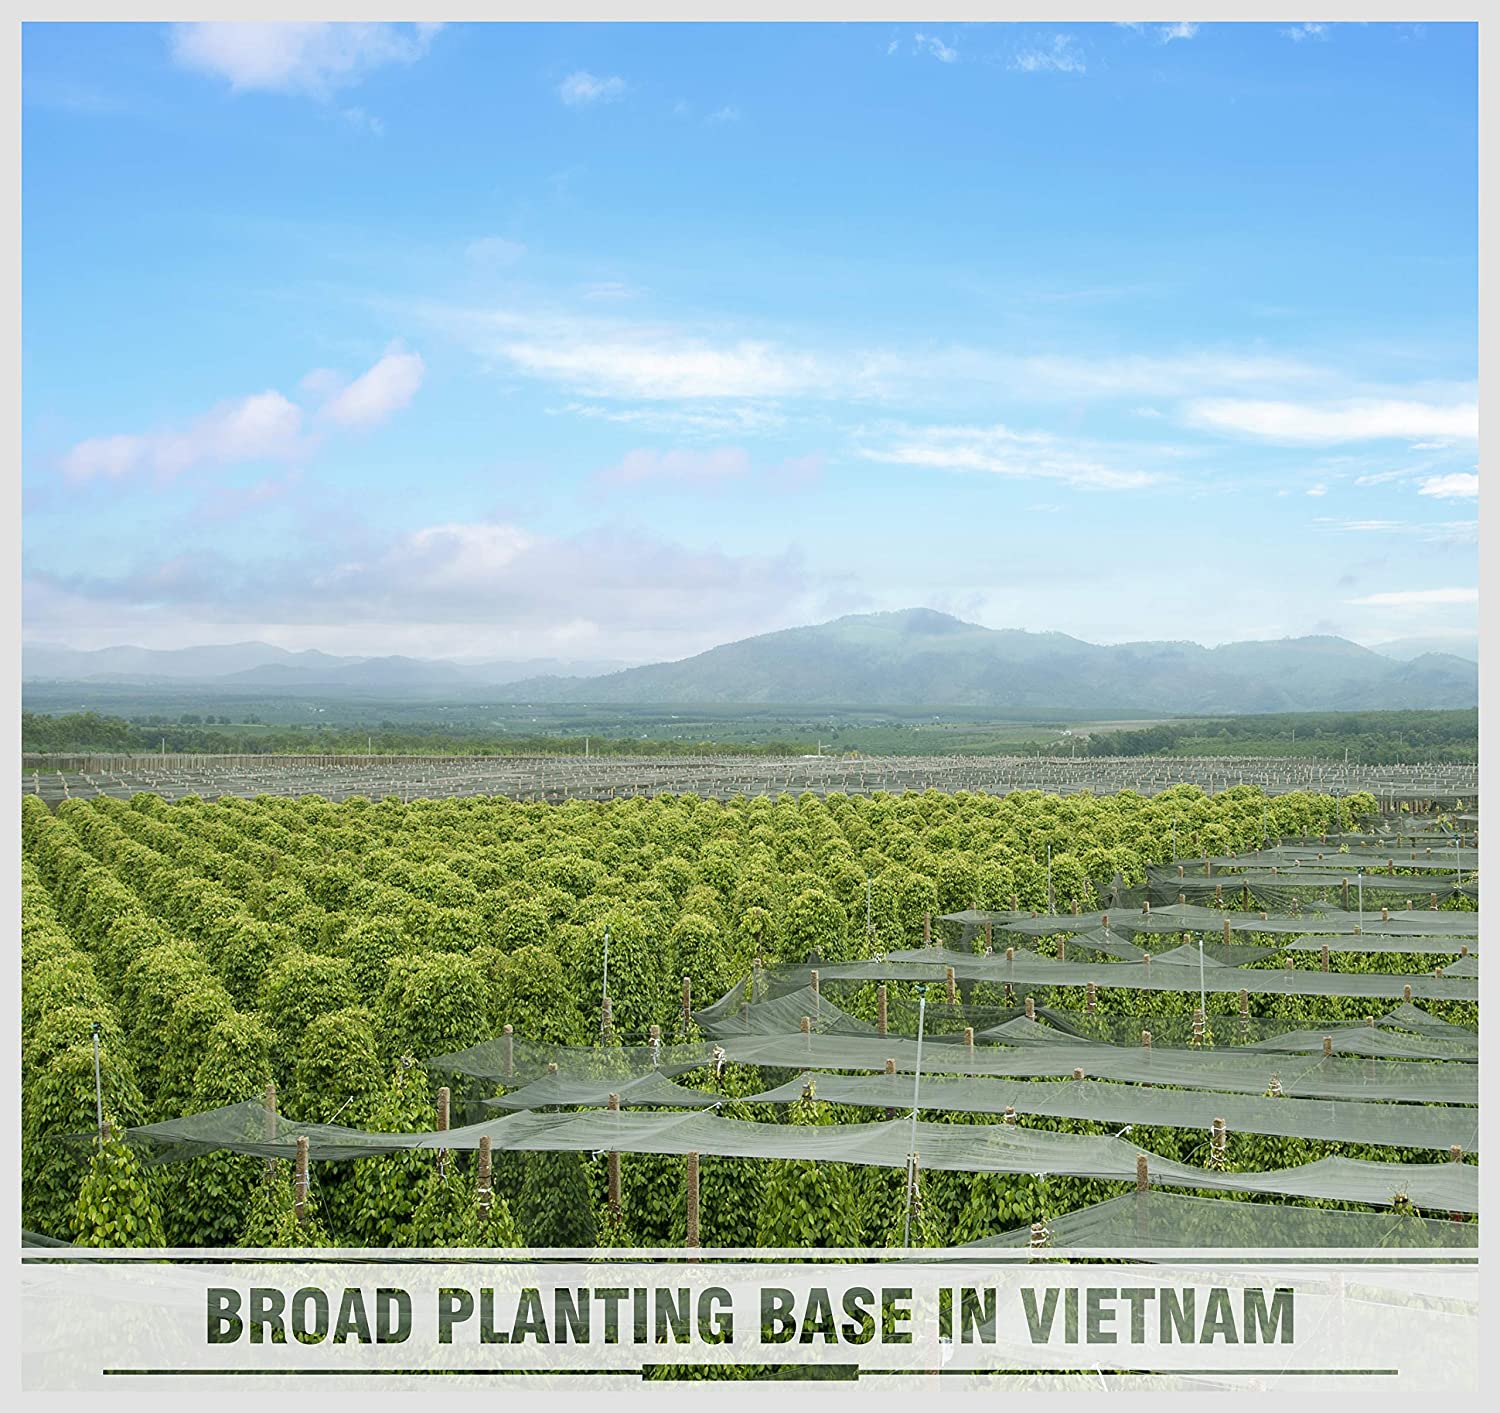 A picture of planting site with words in upper cases "BROAD PLANTING BASE IN VIETNAM"